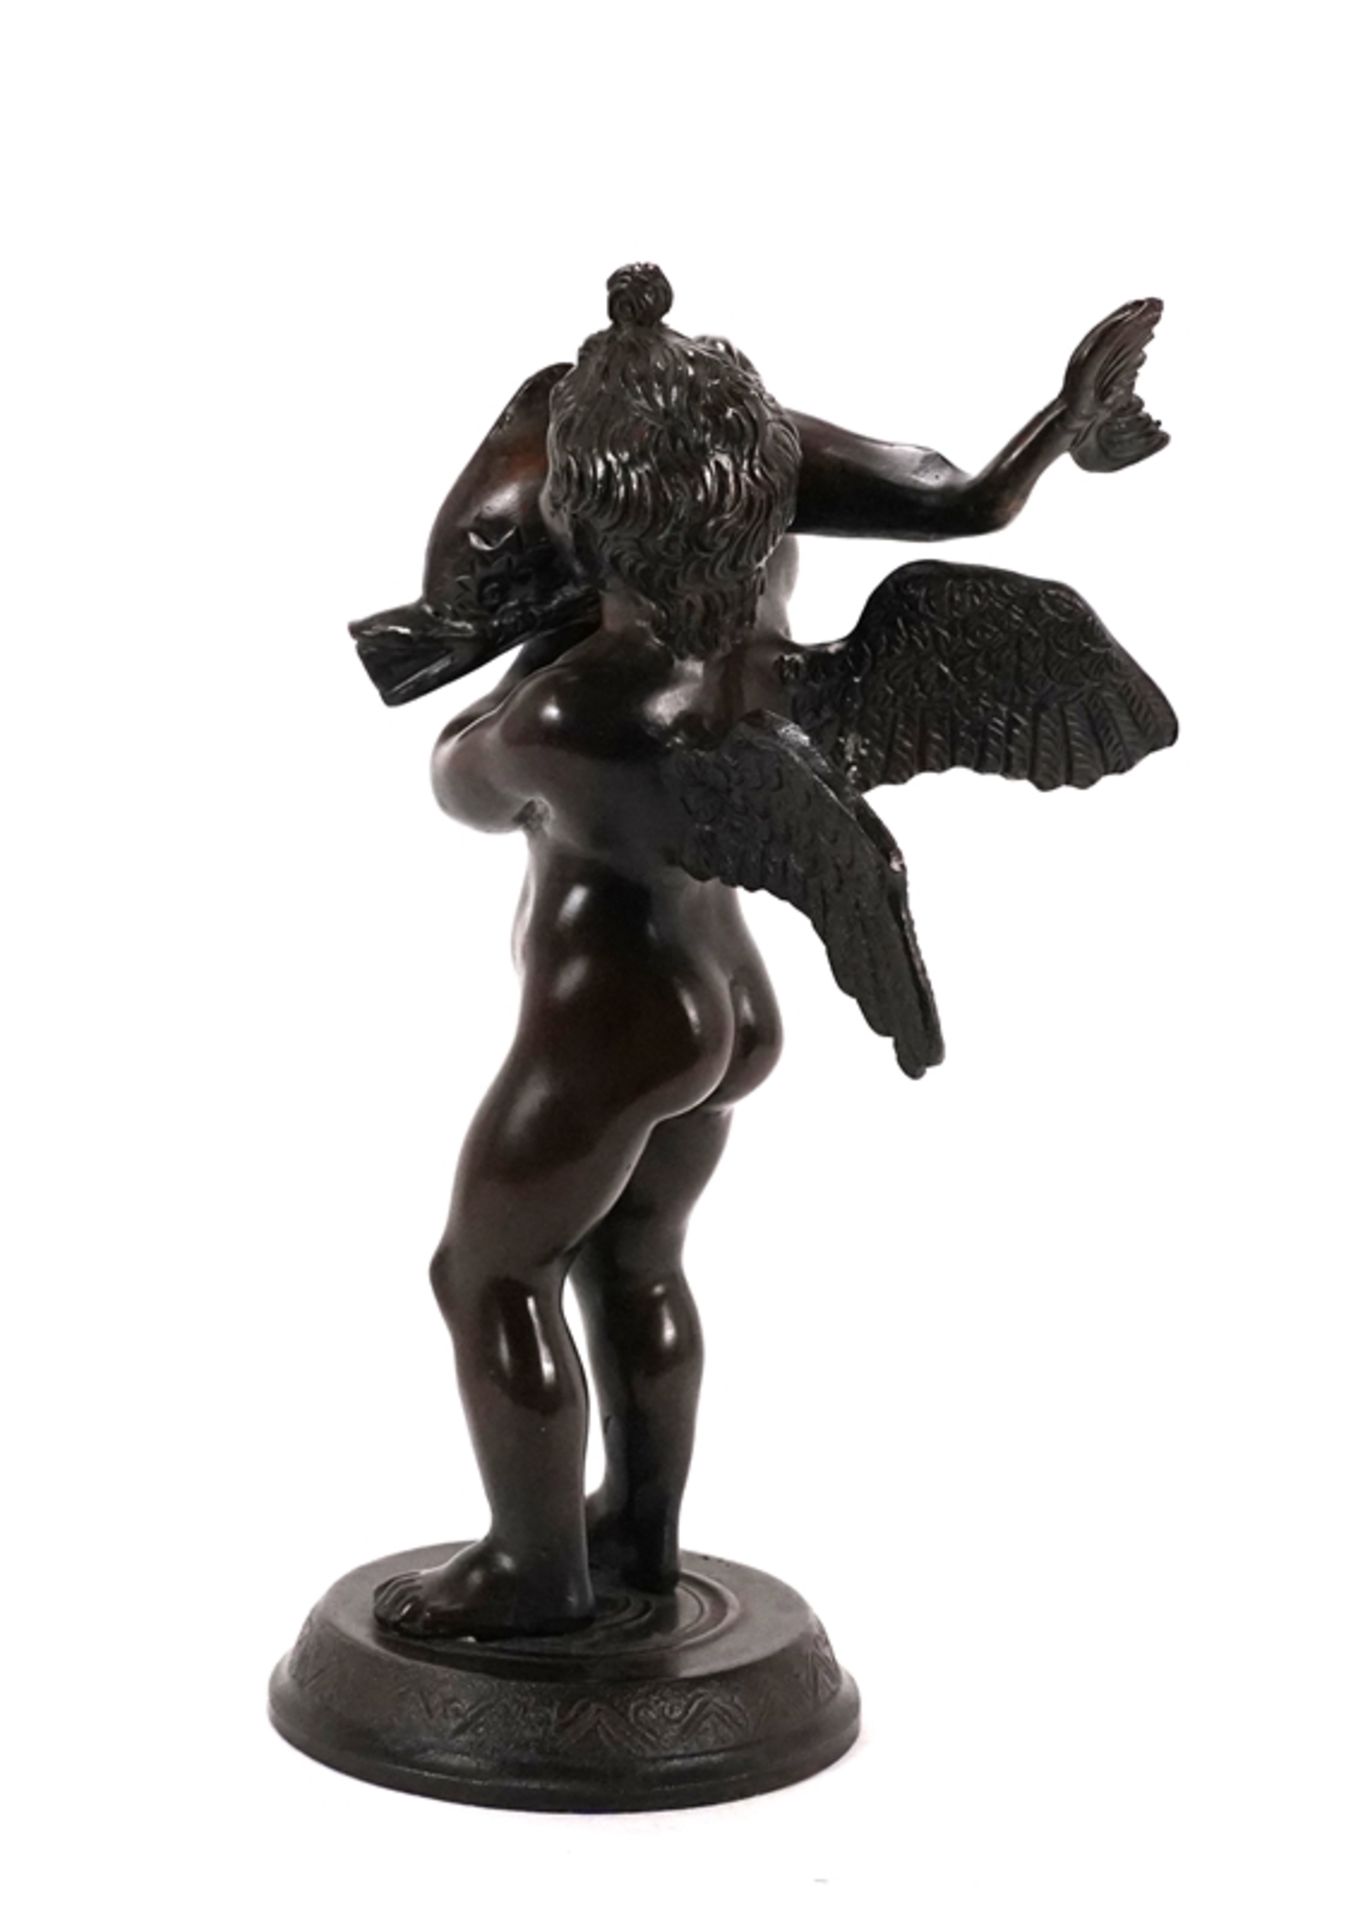 Cupido mit Delphin | Cupid with dolphin - Image 3 of 6